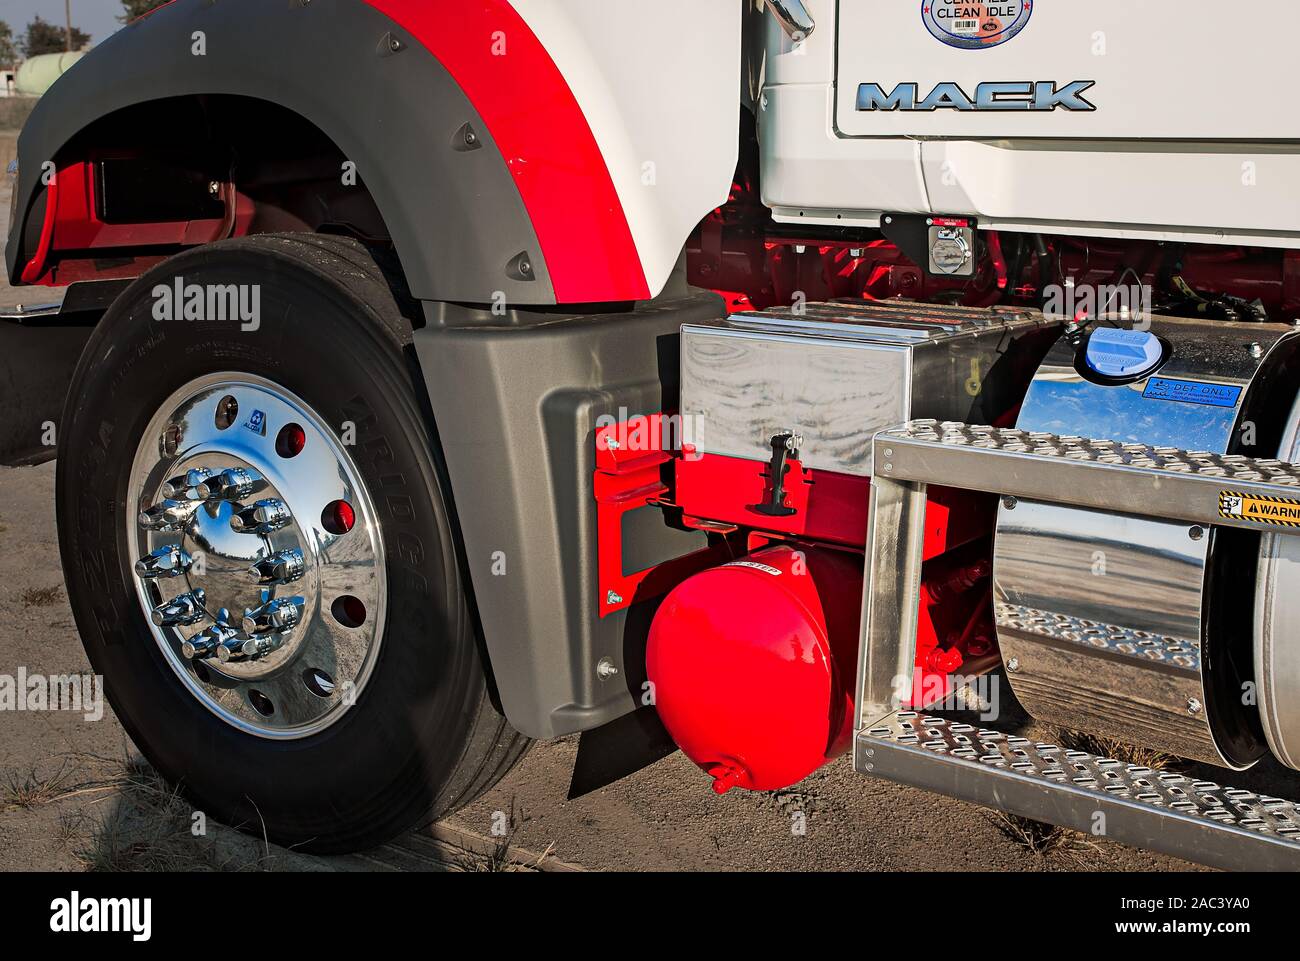 The battery box, DEF tank, and fuel tank are shown on a 2017 Mack Granite at Shealy's Truck Center, Nov. 16, 2016, in Columbia, South Carolina. Stock Photo